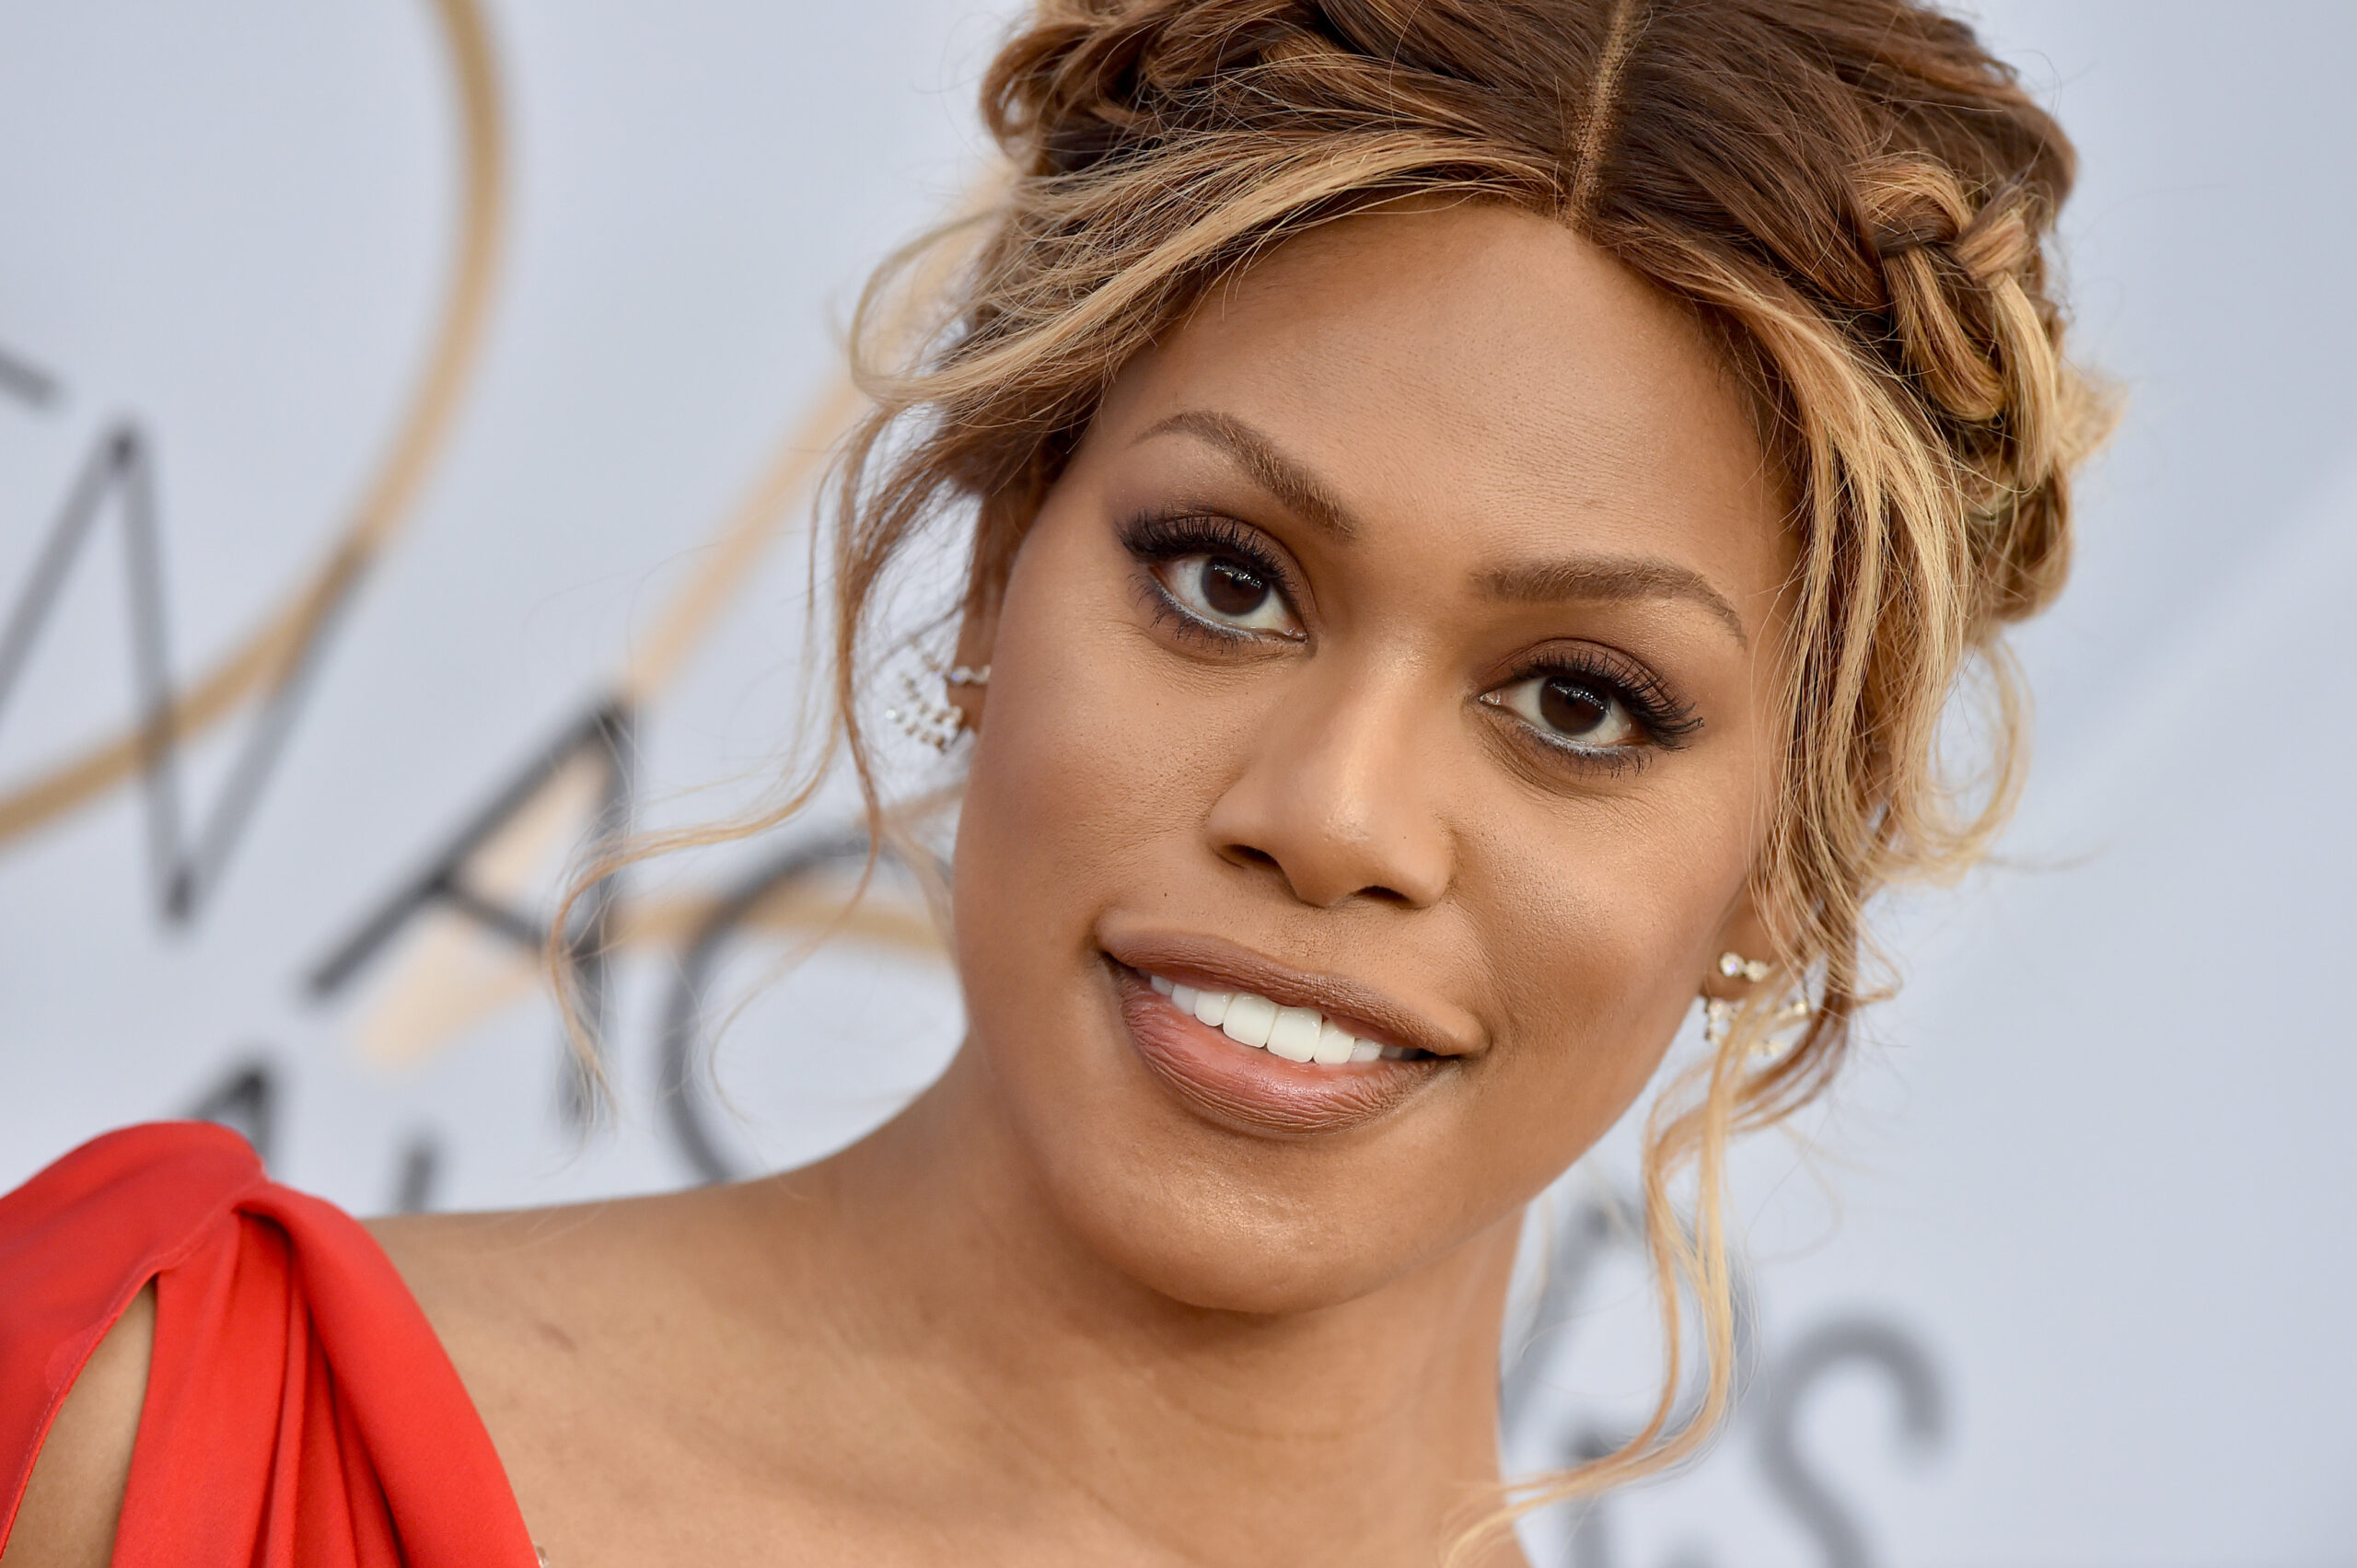 Laverne Cox Speaks Out About Transphobic Attack In Los Angeles